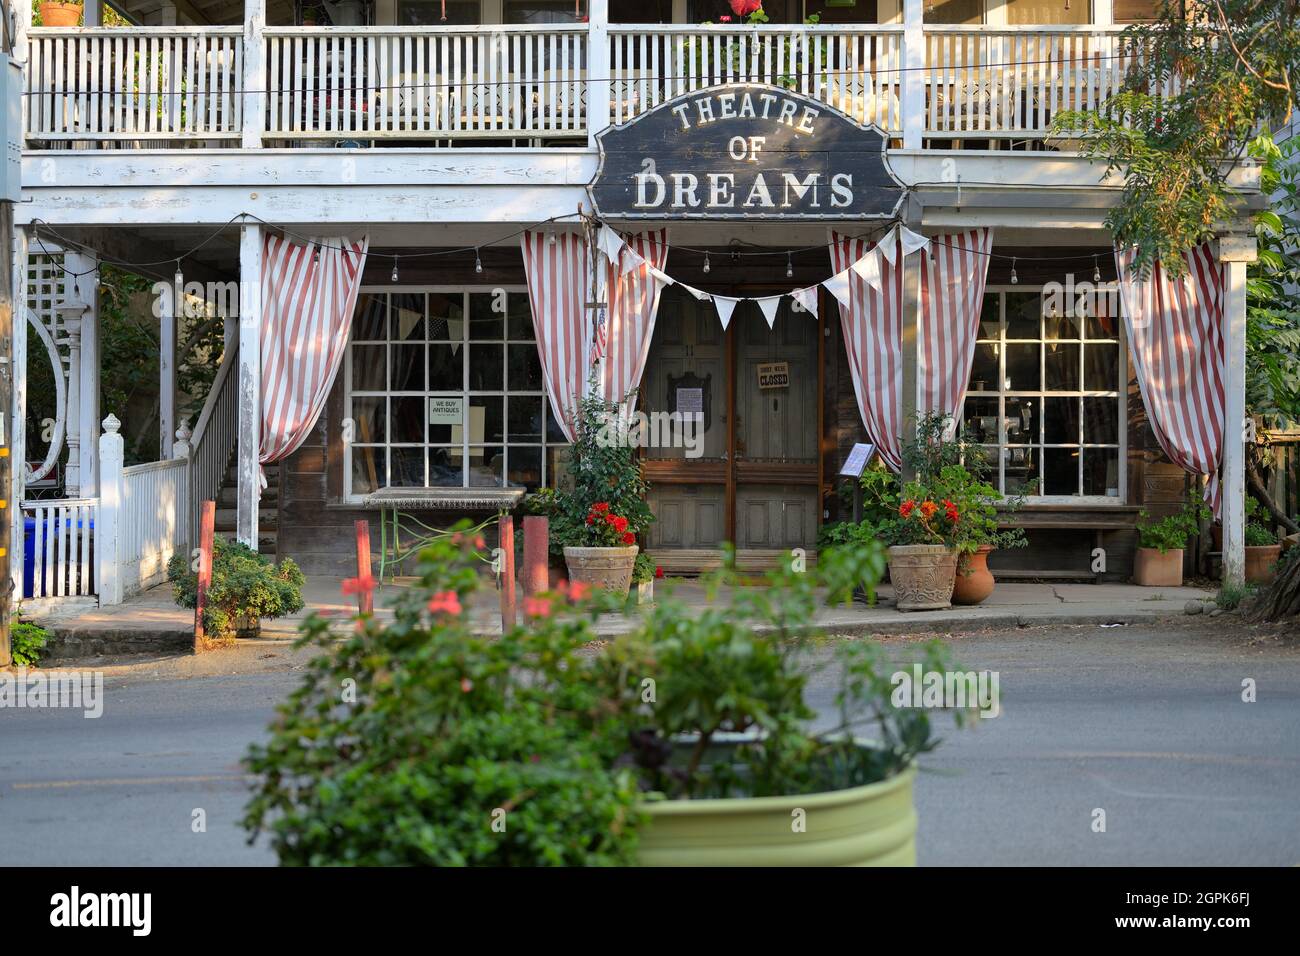 The Theatre of Dreams - a quaint main street boutique like in the Old West, Port Costa CA Stock Photo